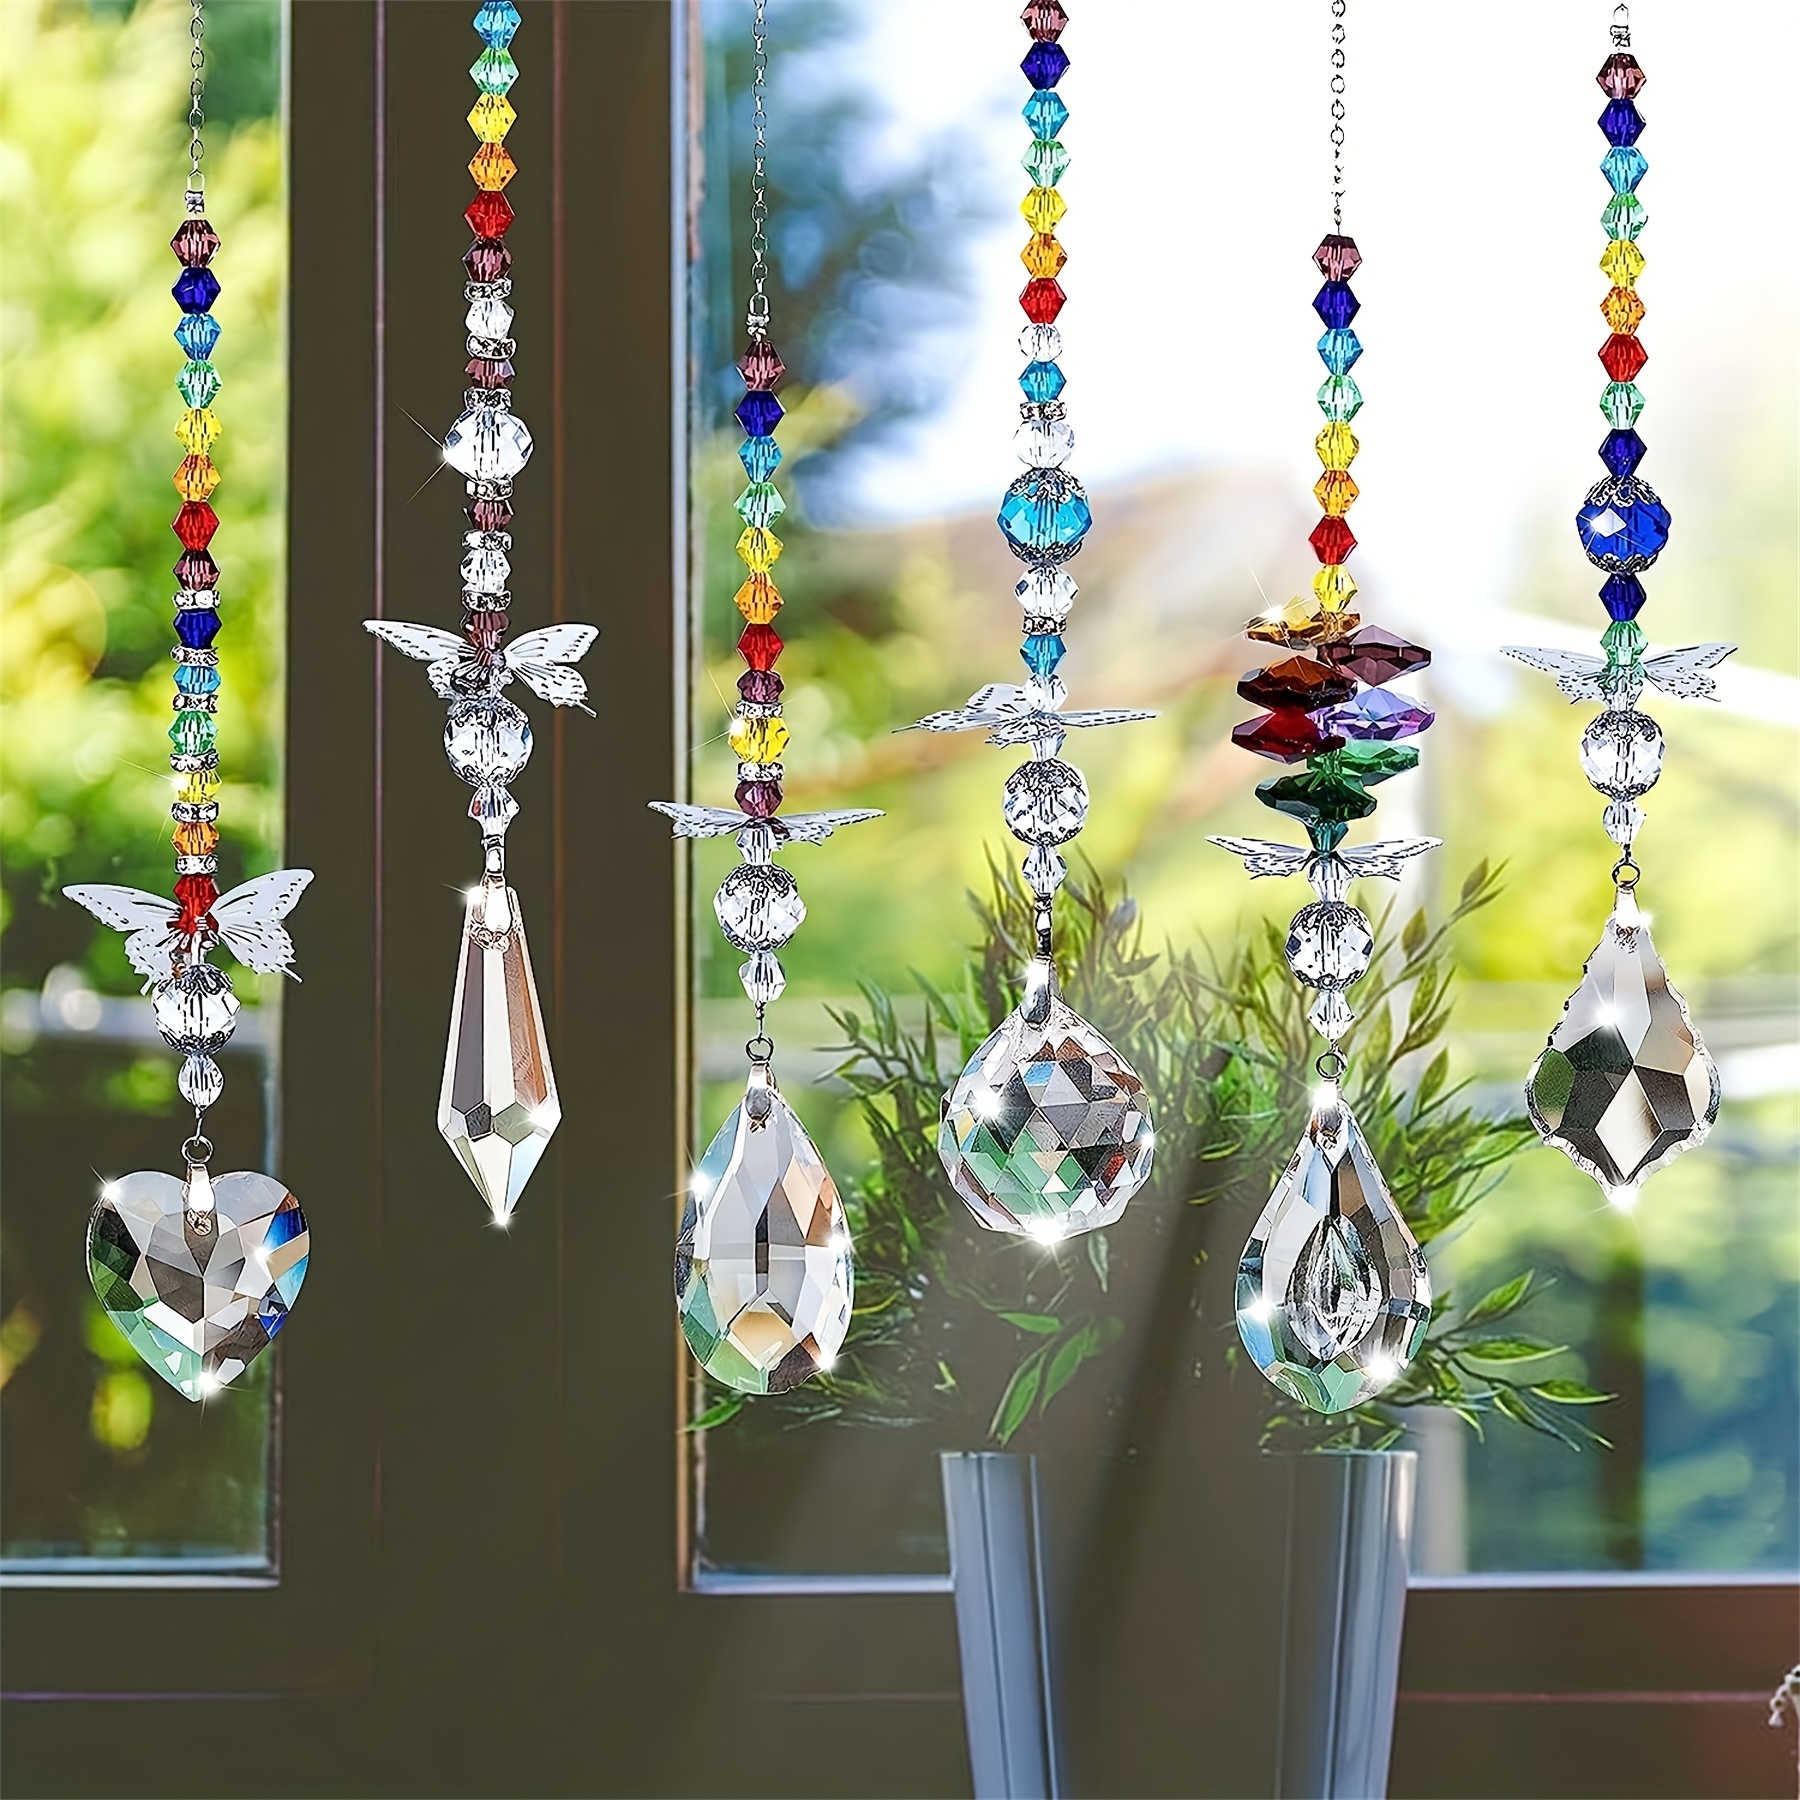 

6 Pcs Glass Ball Bead, Prism Sunlight Catcher, Window Rainbow Device With Butterfly Shape Bead, Hanging Ornament For Home, Office, Garden Decoration